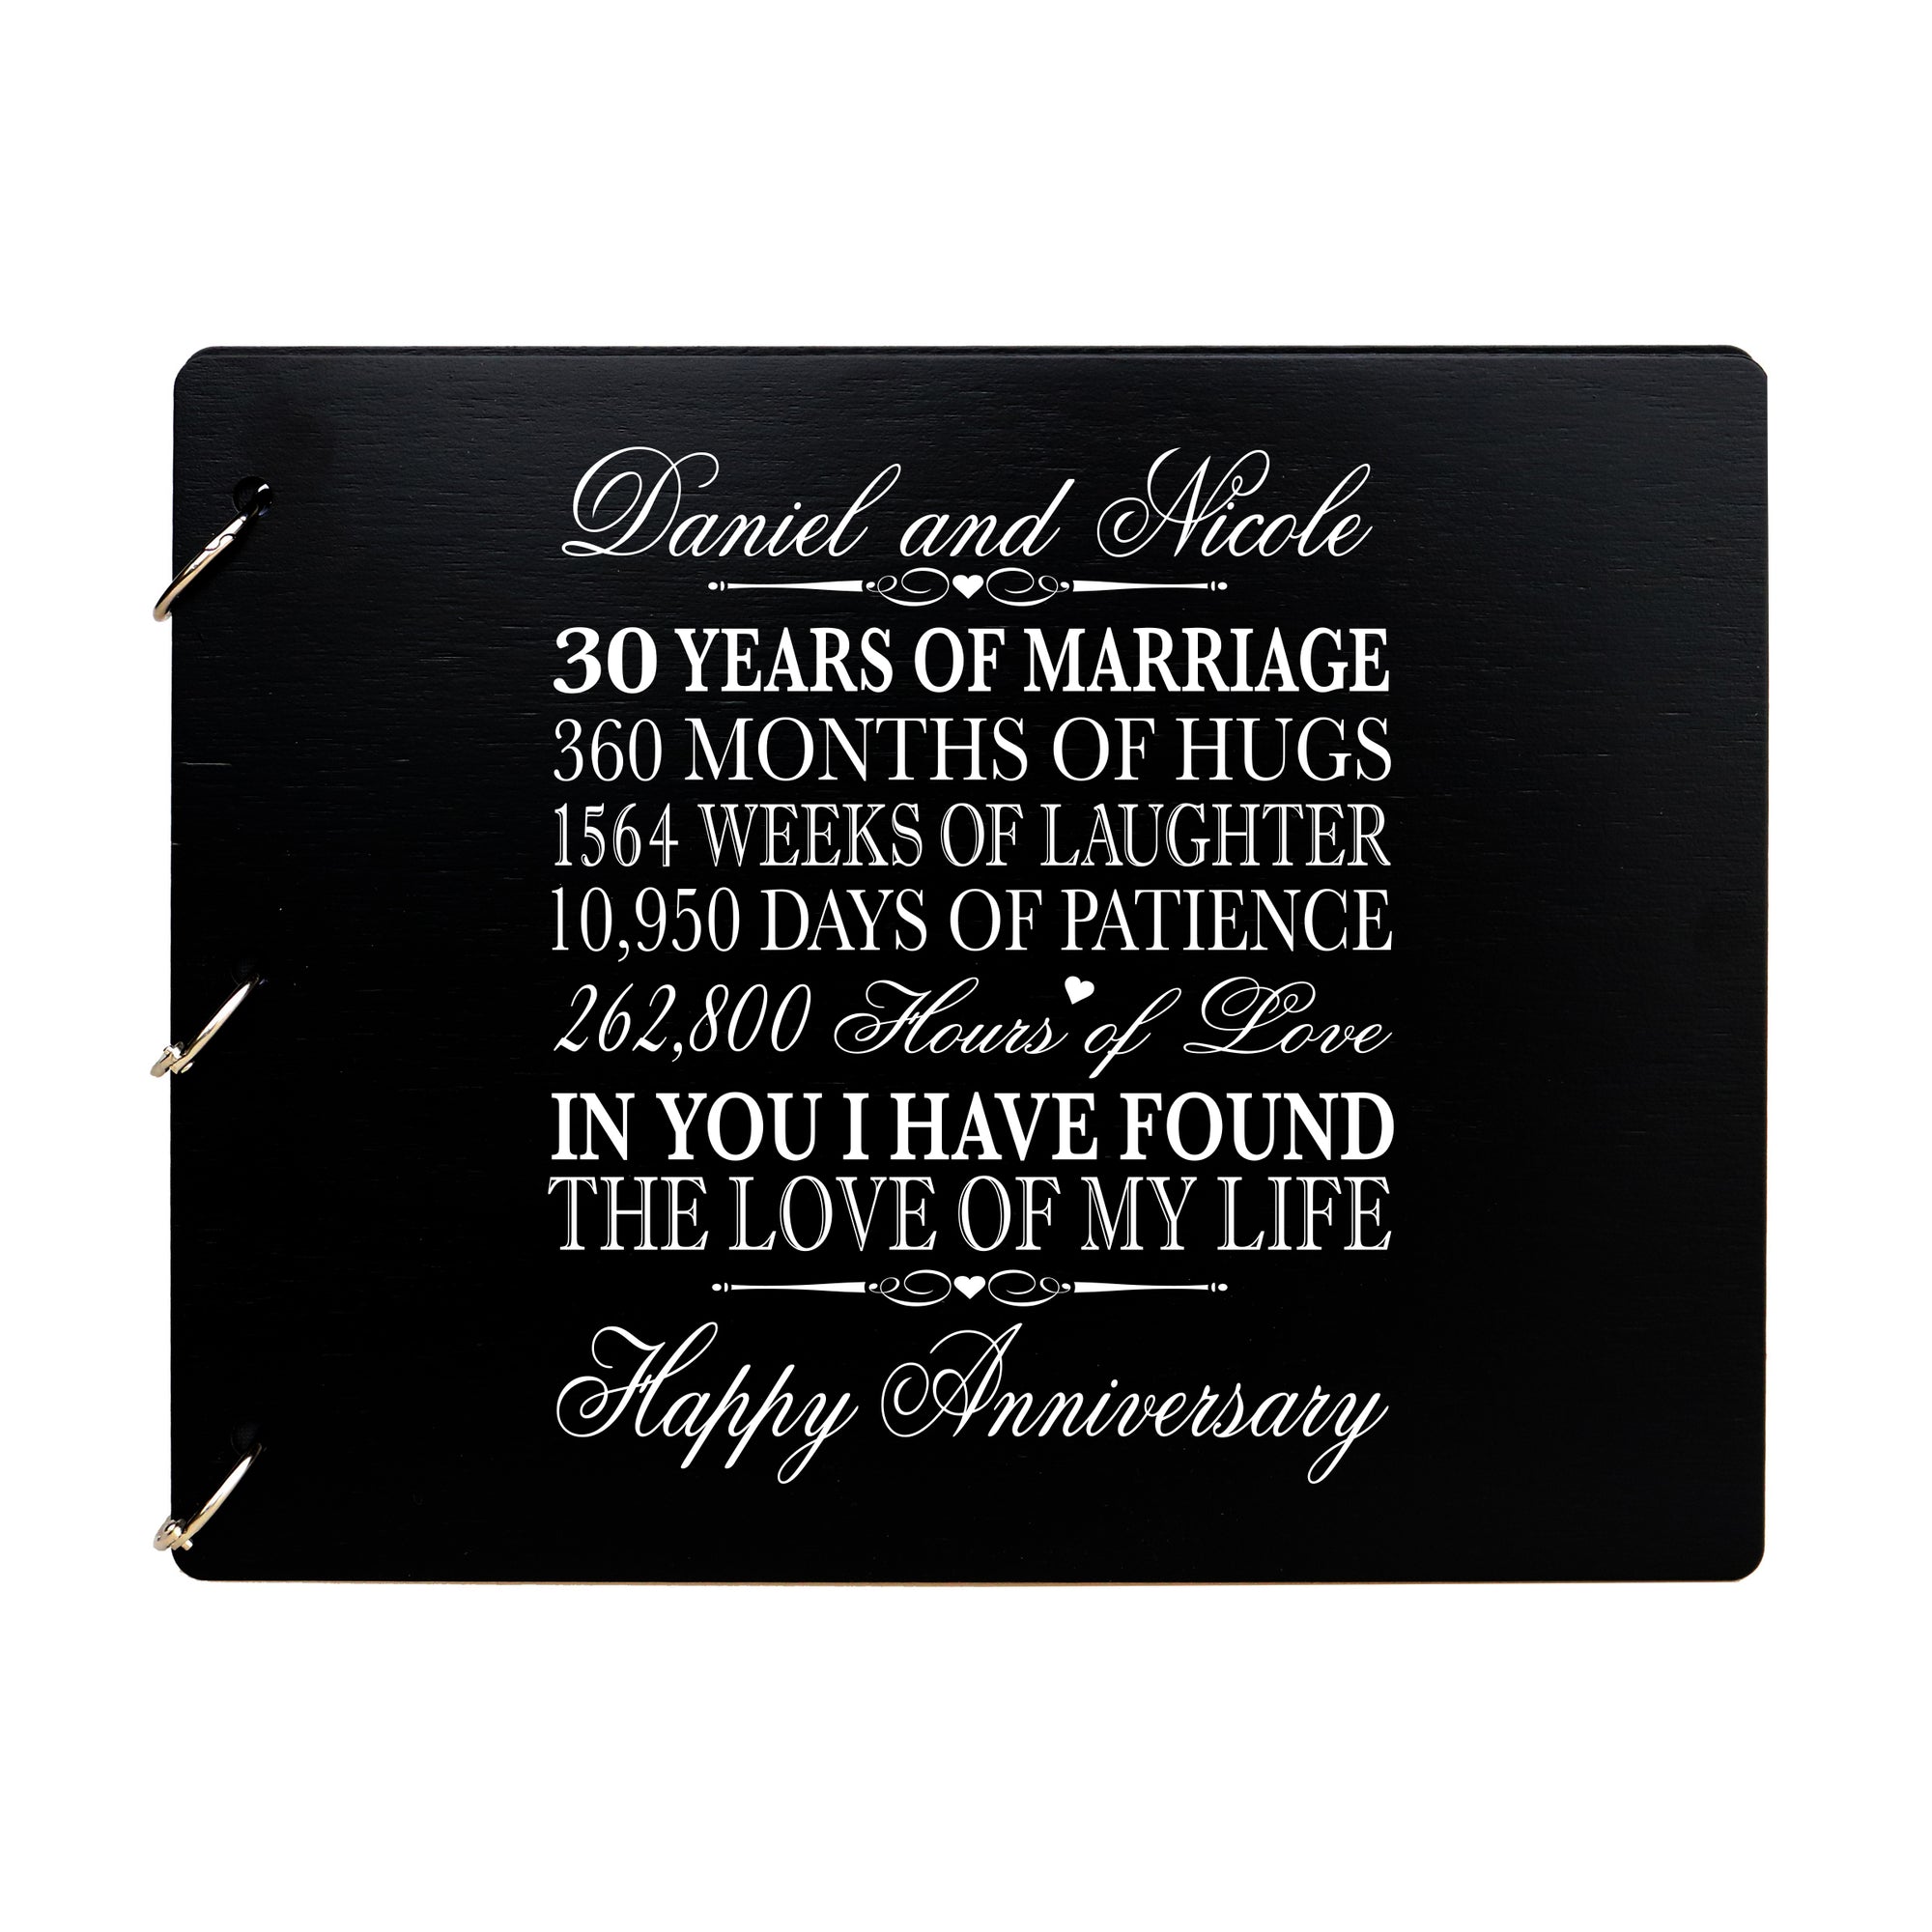 LifeSong Milestones Personalized Guestbook Sign for 30th Wedding Anniversary Gift Ideas